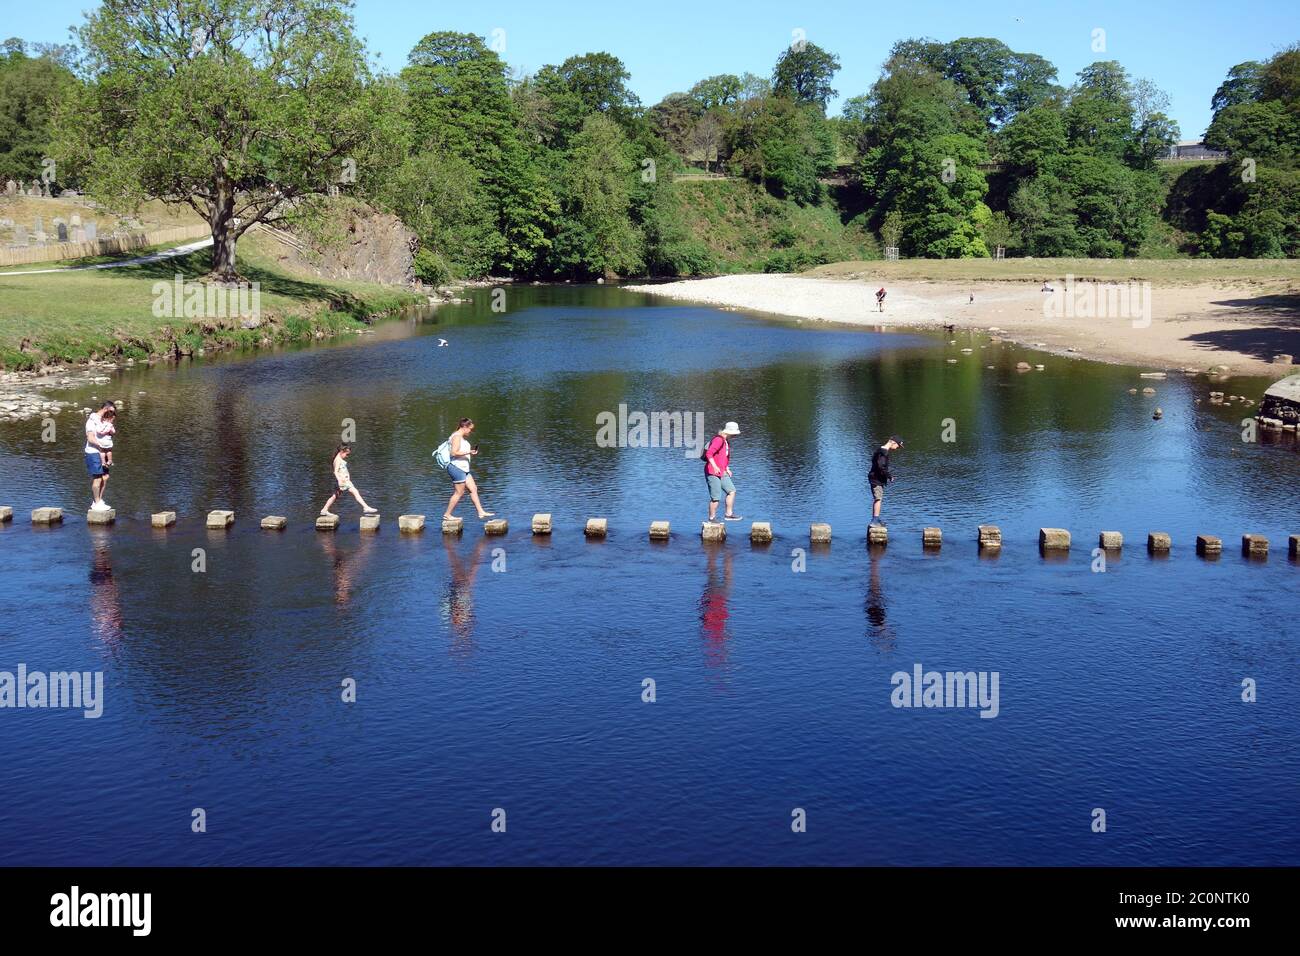 Family Walking on Stepping Stones over the River Wharfe by the Ruins of Bolton Priory, Wharfedale, Yorkshire Dales National Park, England UK. Stock Photo